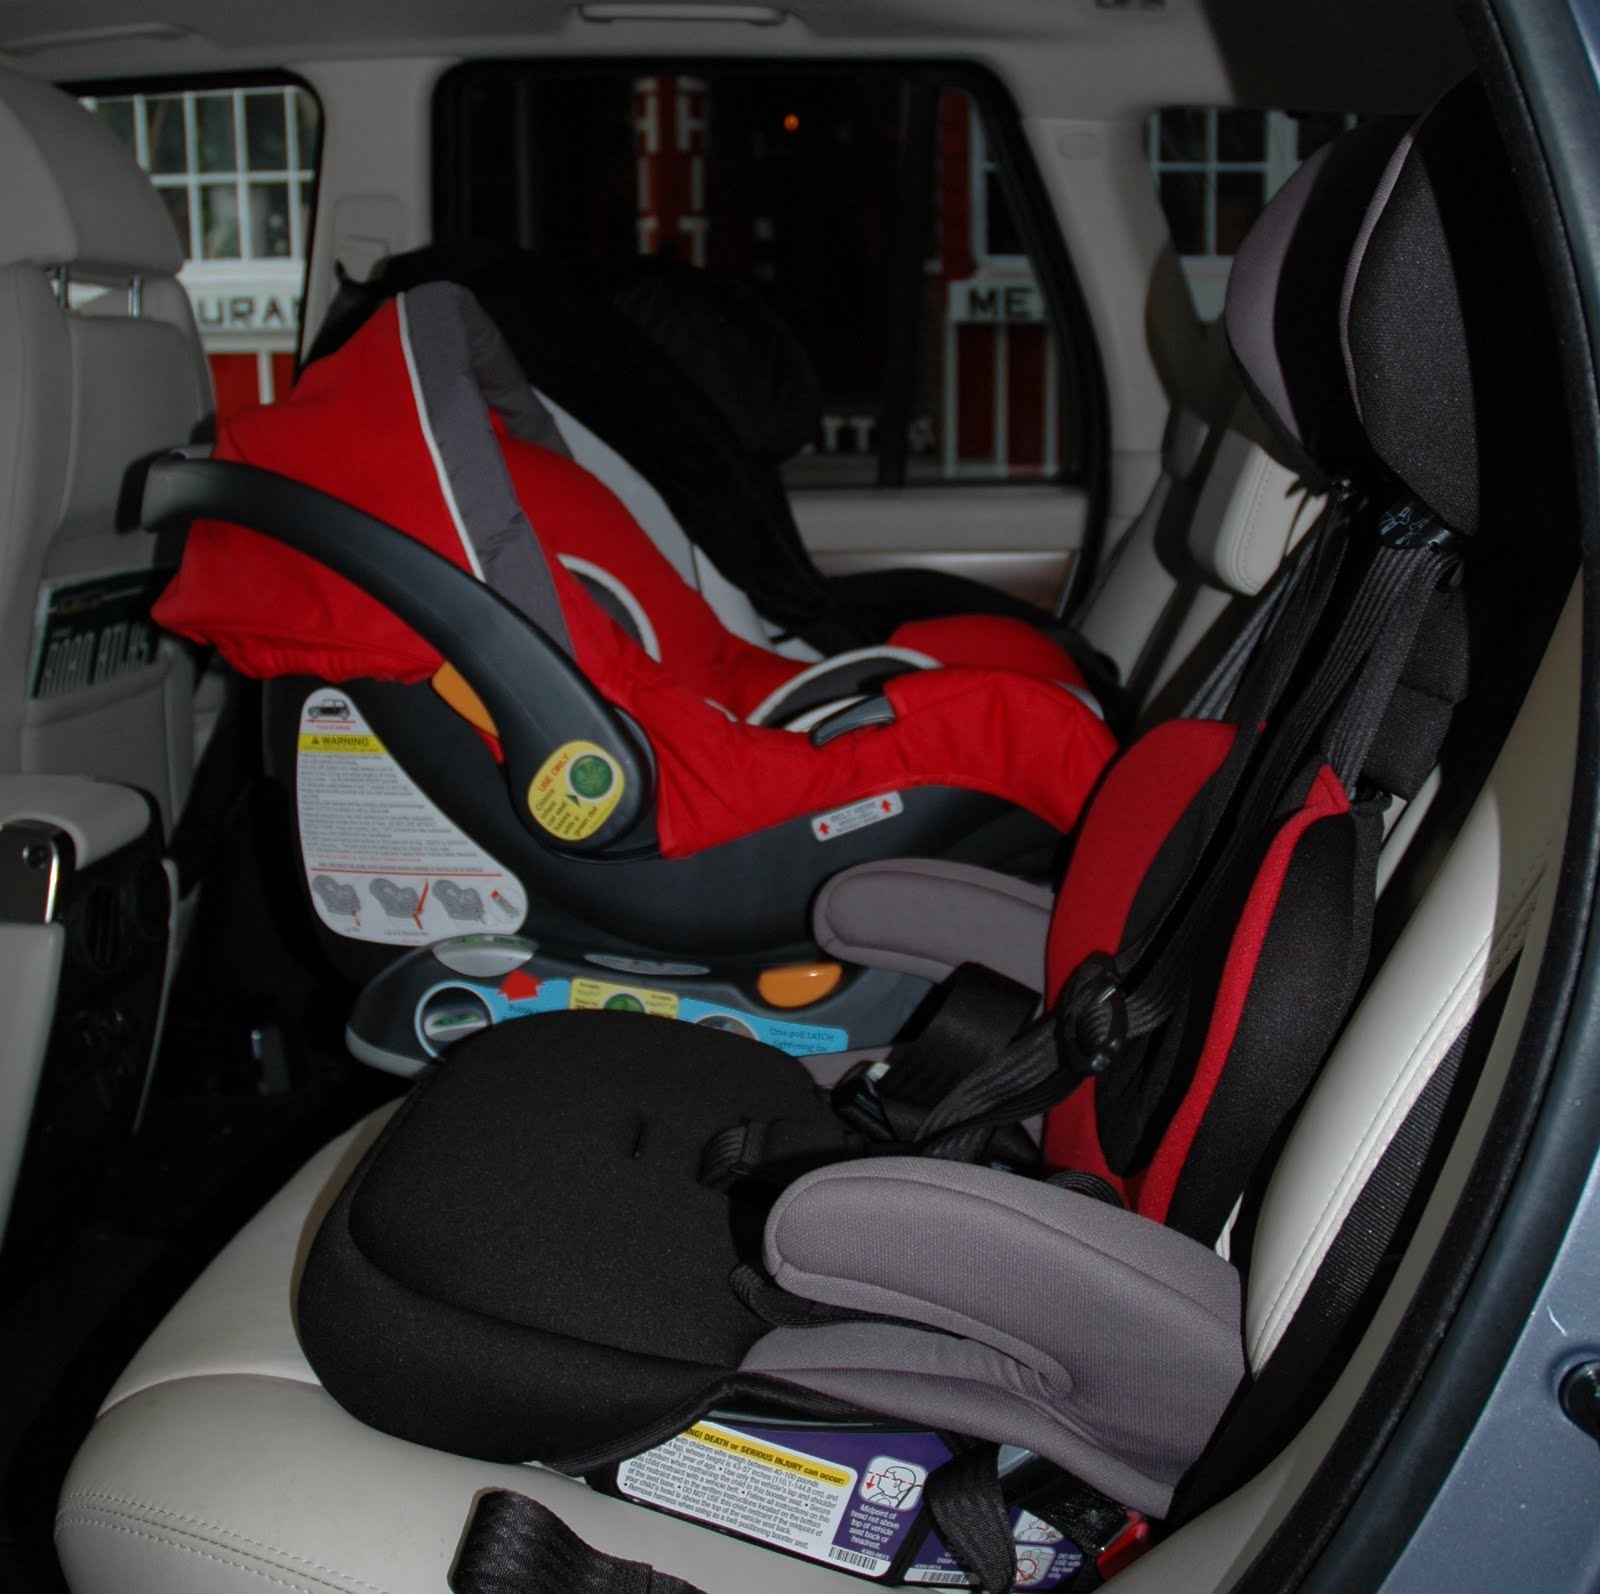 How To Install Graco Car Seat